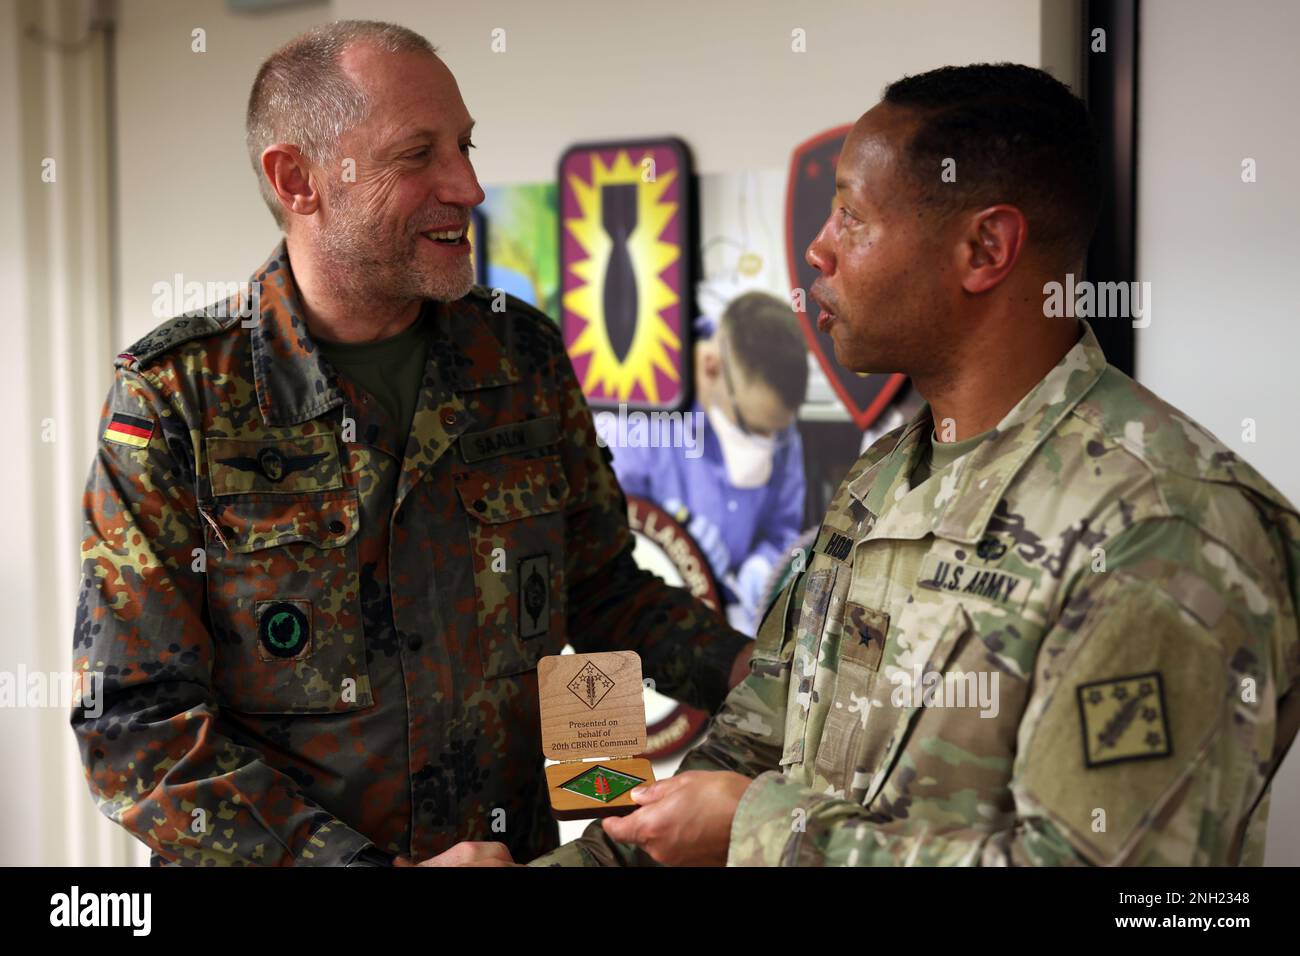 Brig. Gen. Daryl O. Hood (right), the commanding general of the 20th Chemical, Biological, Radiological, Nuclear, Explosives (CBRNE) Command, shakes hands with Col. Stephan Saalow, the commander of the German CBRN Defense Command, Dec. 7.  The two commanders exchanged command briefs and discussed training exercises that support building partnership capacity opportunities. U.S. Army photo by Marshall R. Mason. Stock Photo